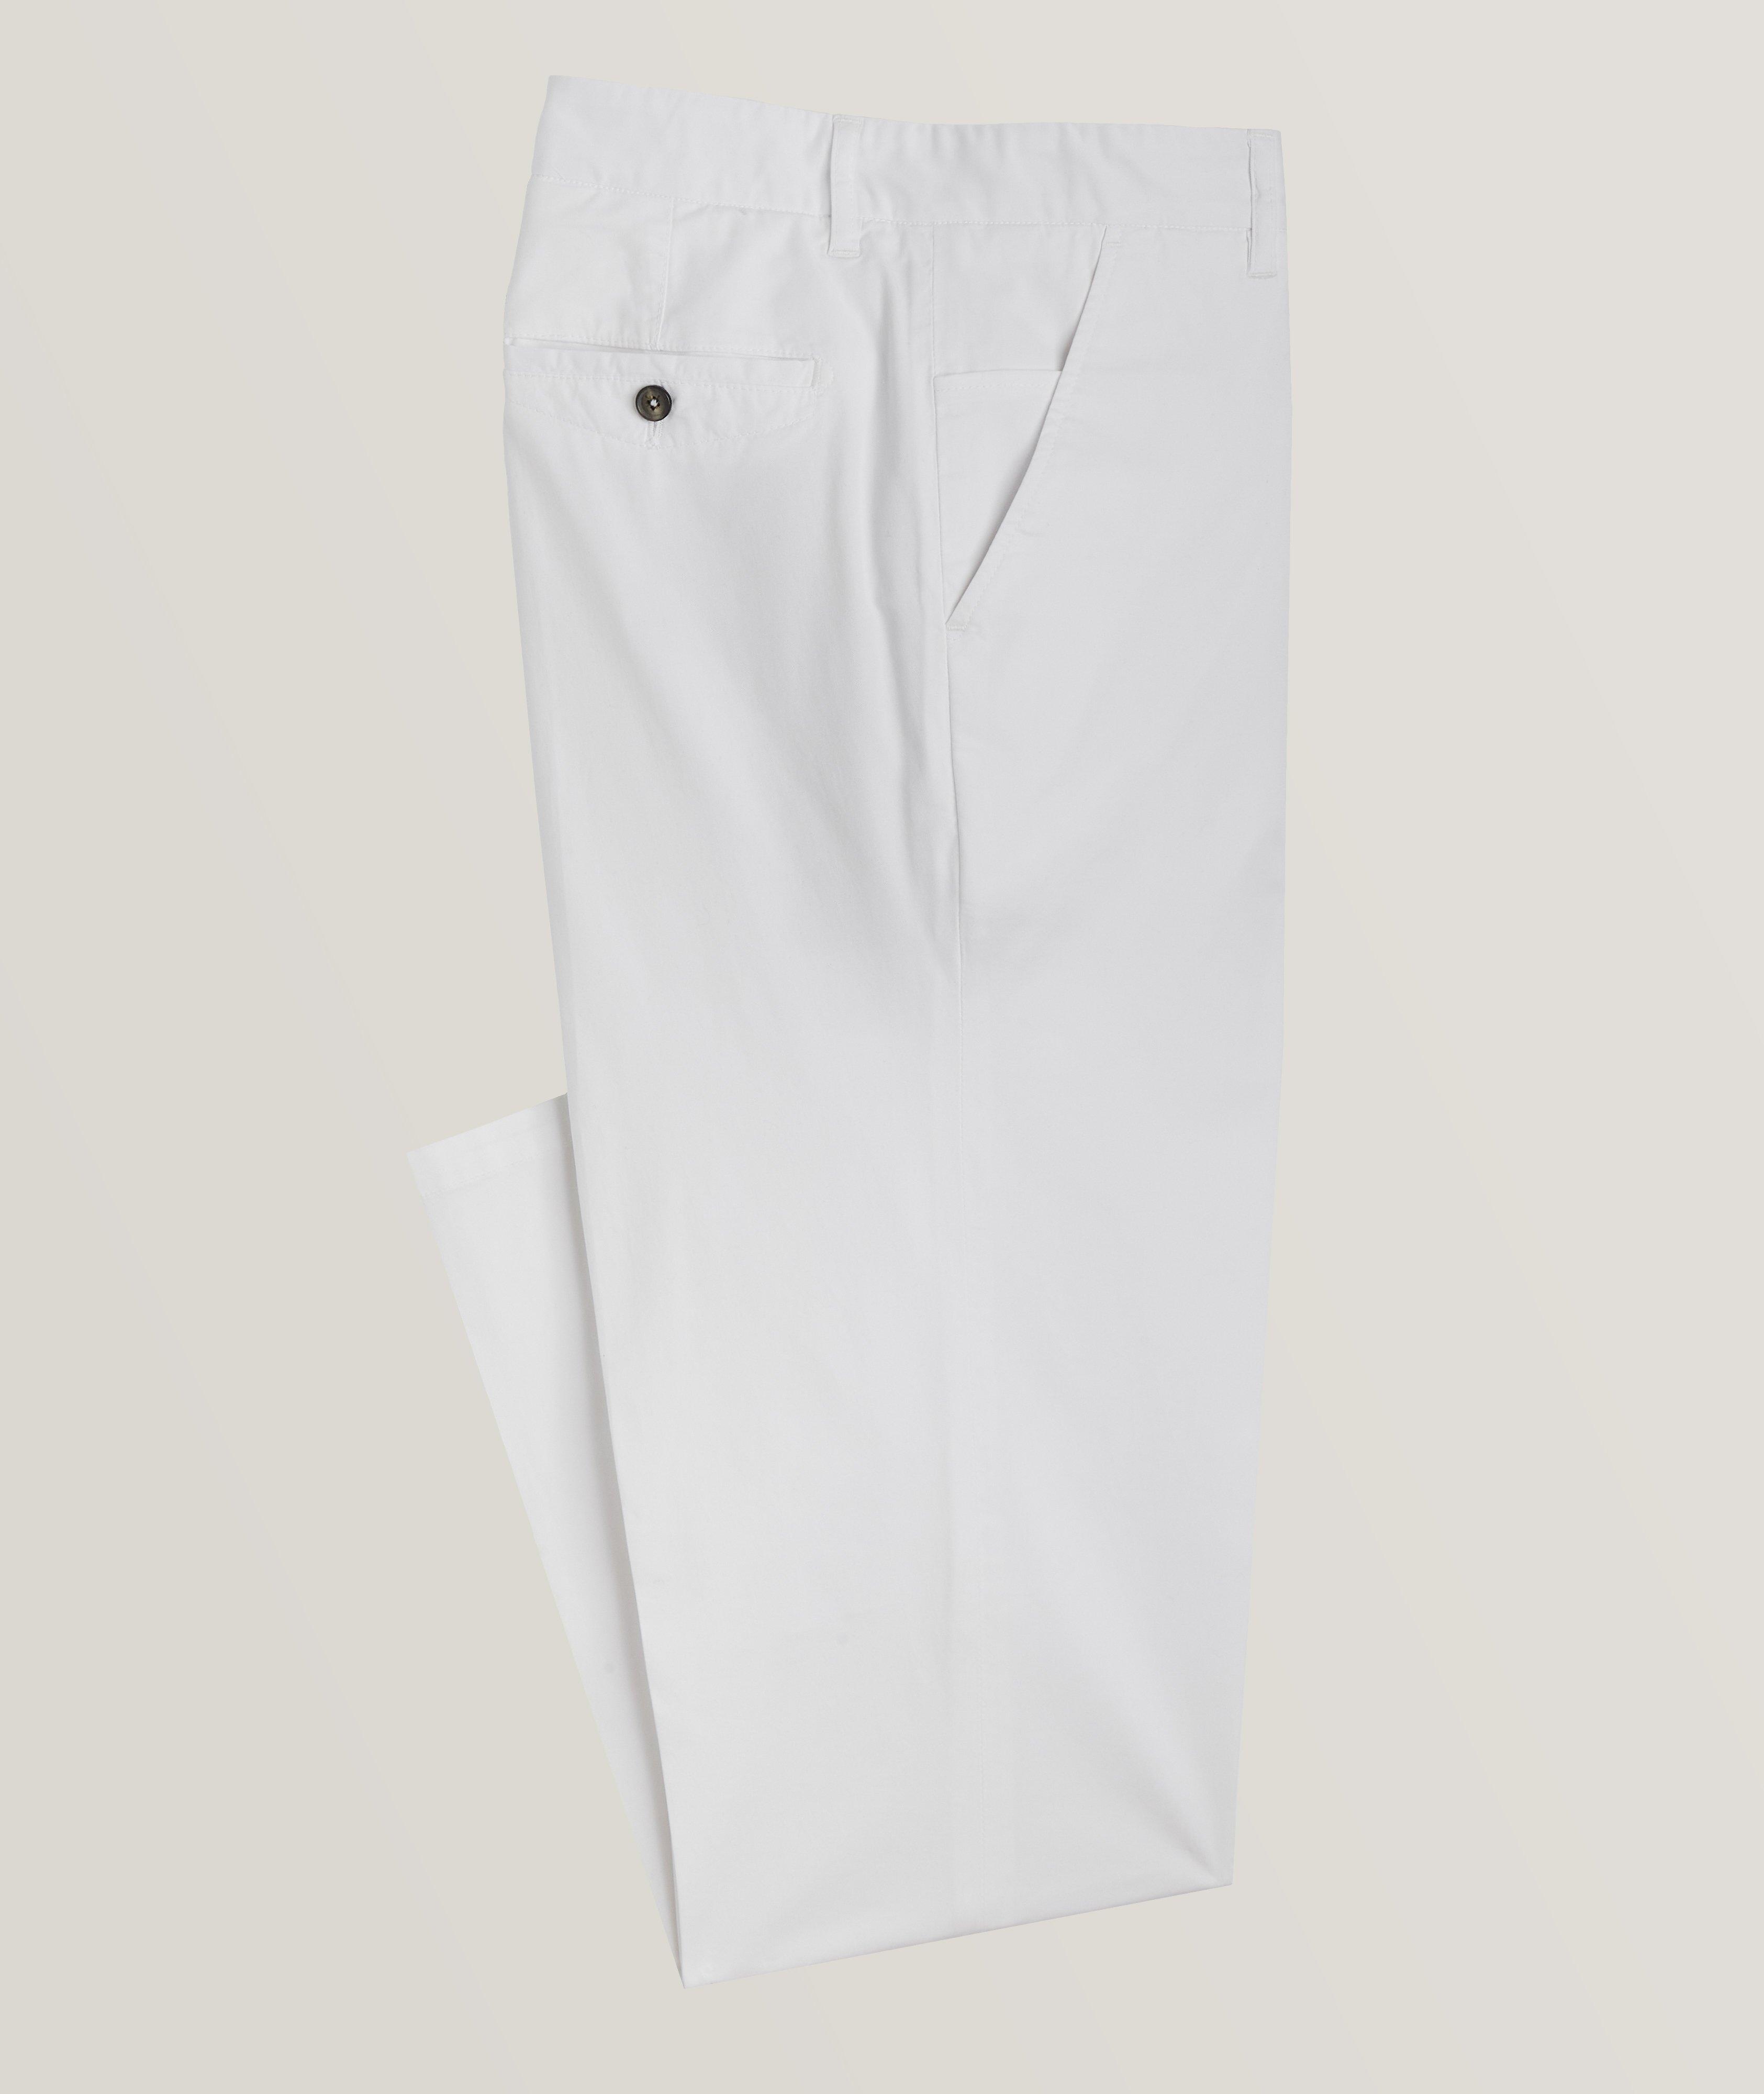 Isaia Slim-Fit Cotton-Stretch Chino Pants